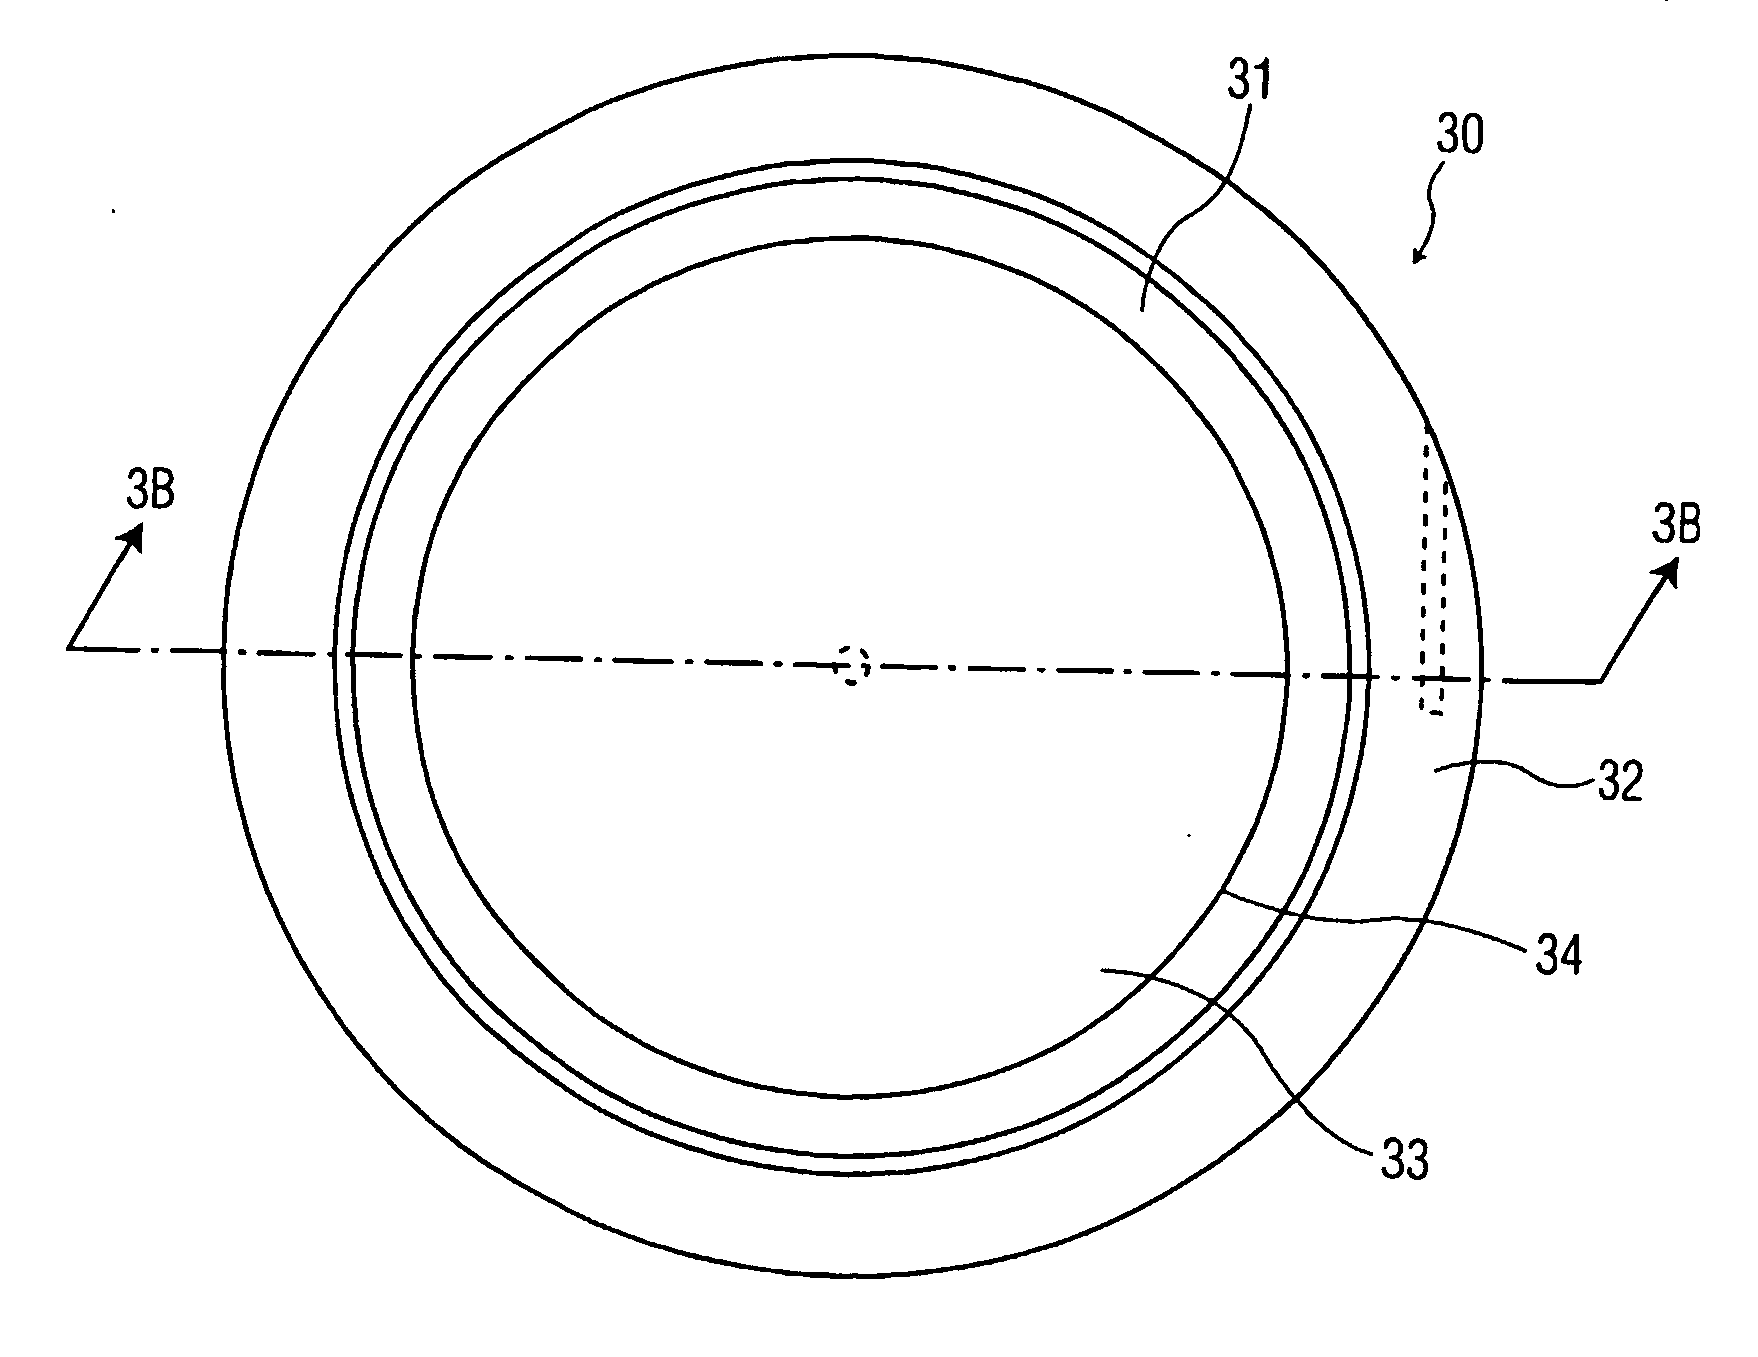 System and method for suppression of wafer temperature drift in cold-wall cvd systems